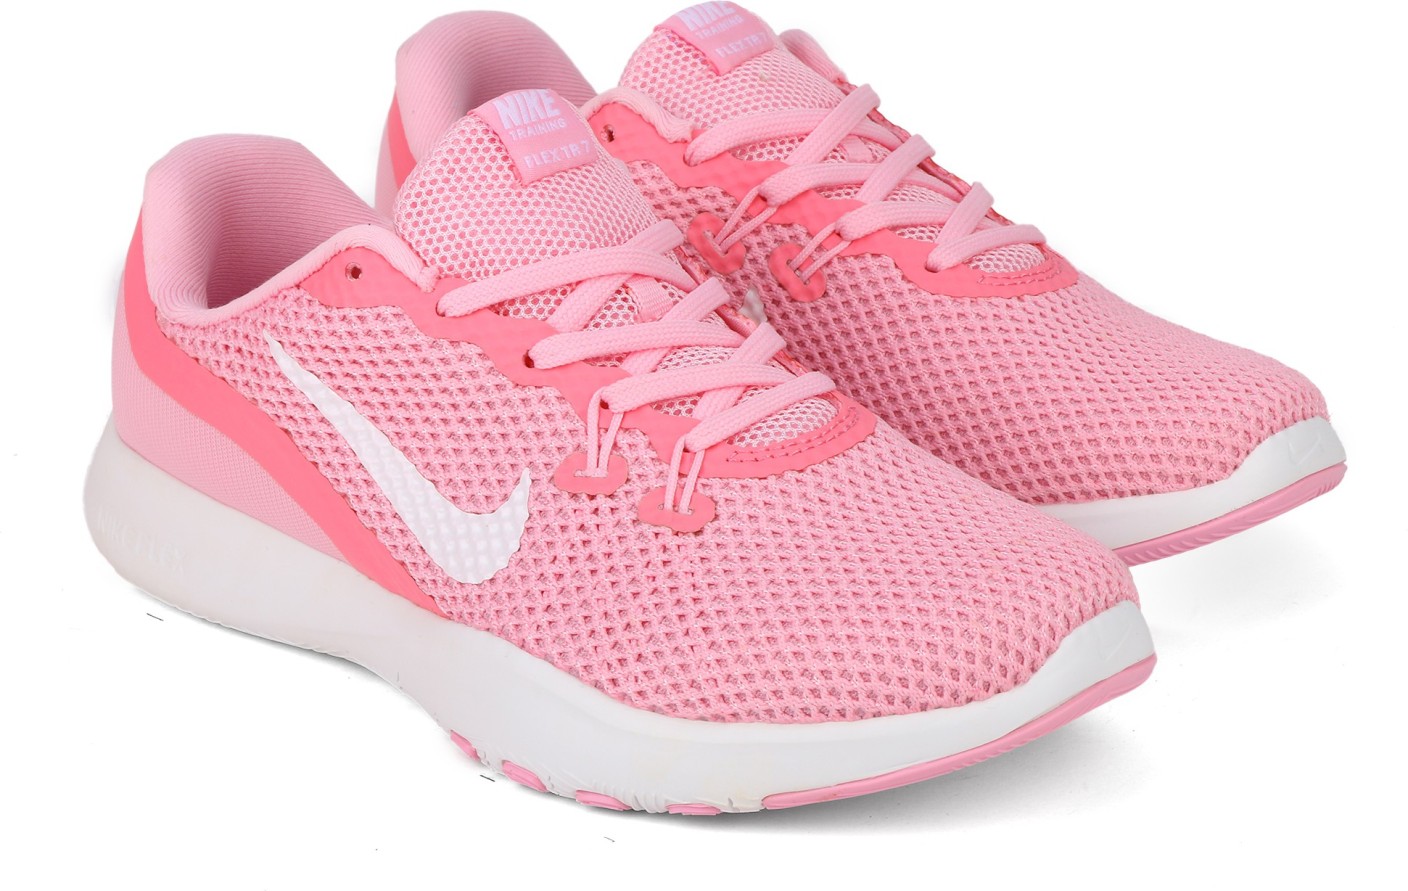 Bright pink trainers